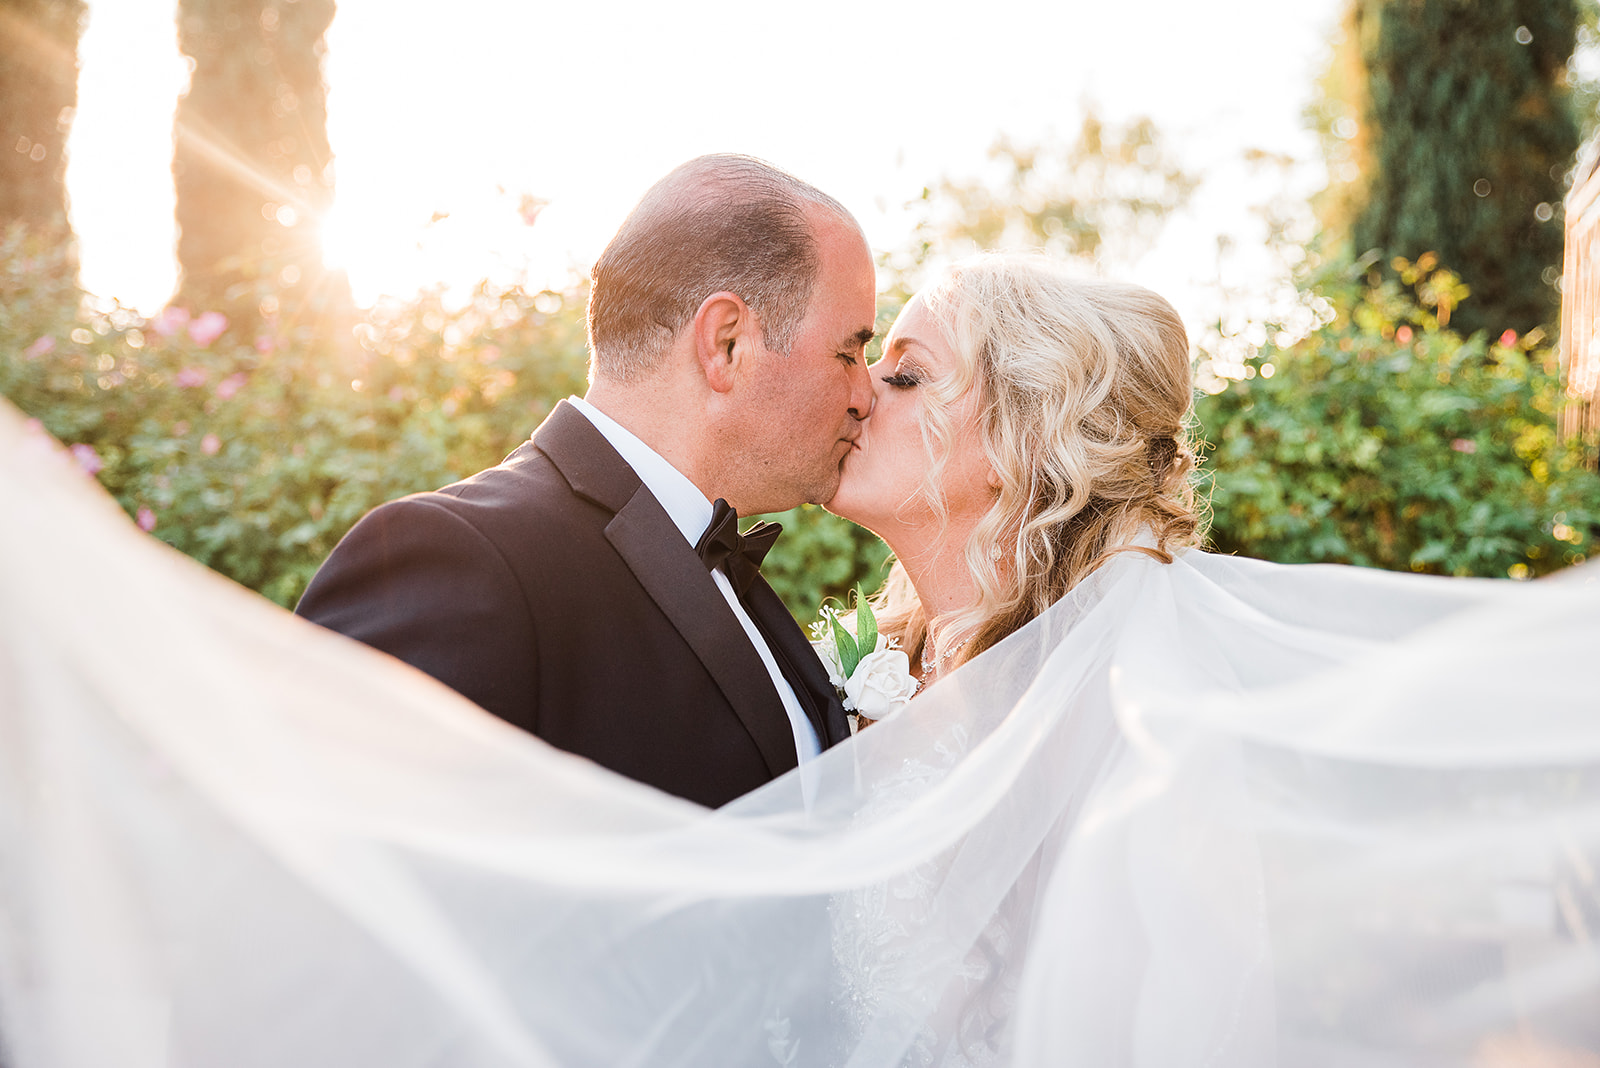 NEwlyweds kiss as the veil flows in the wind at sunset in a garden